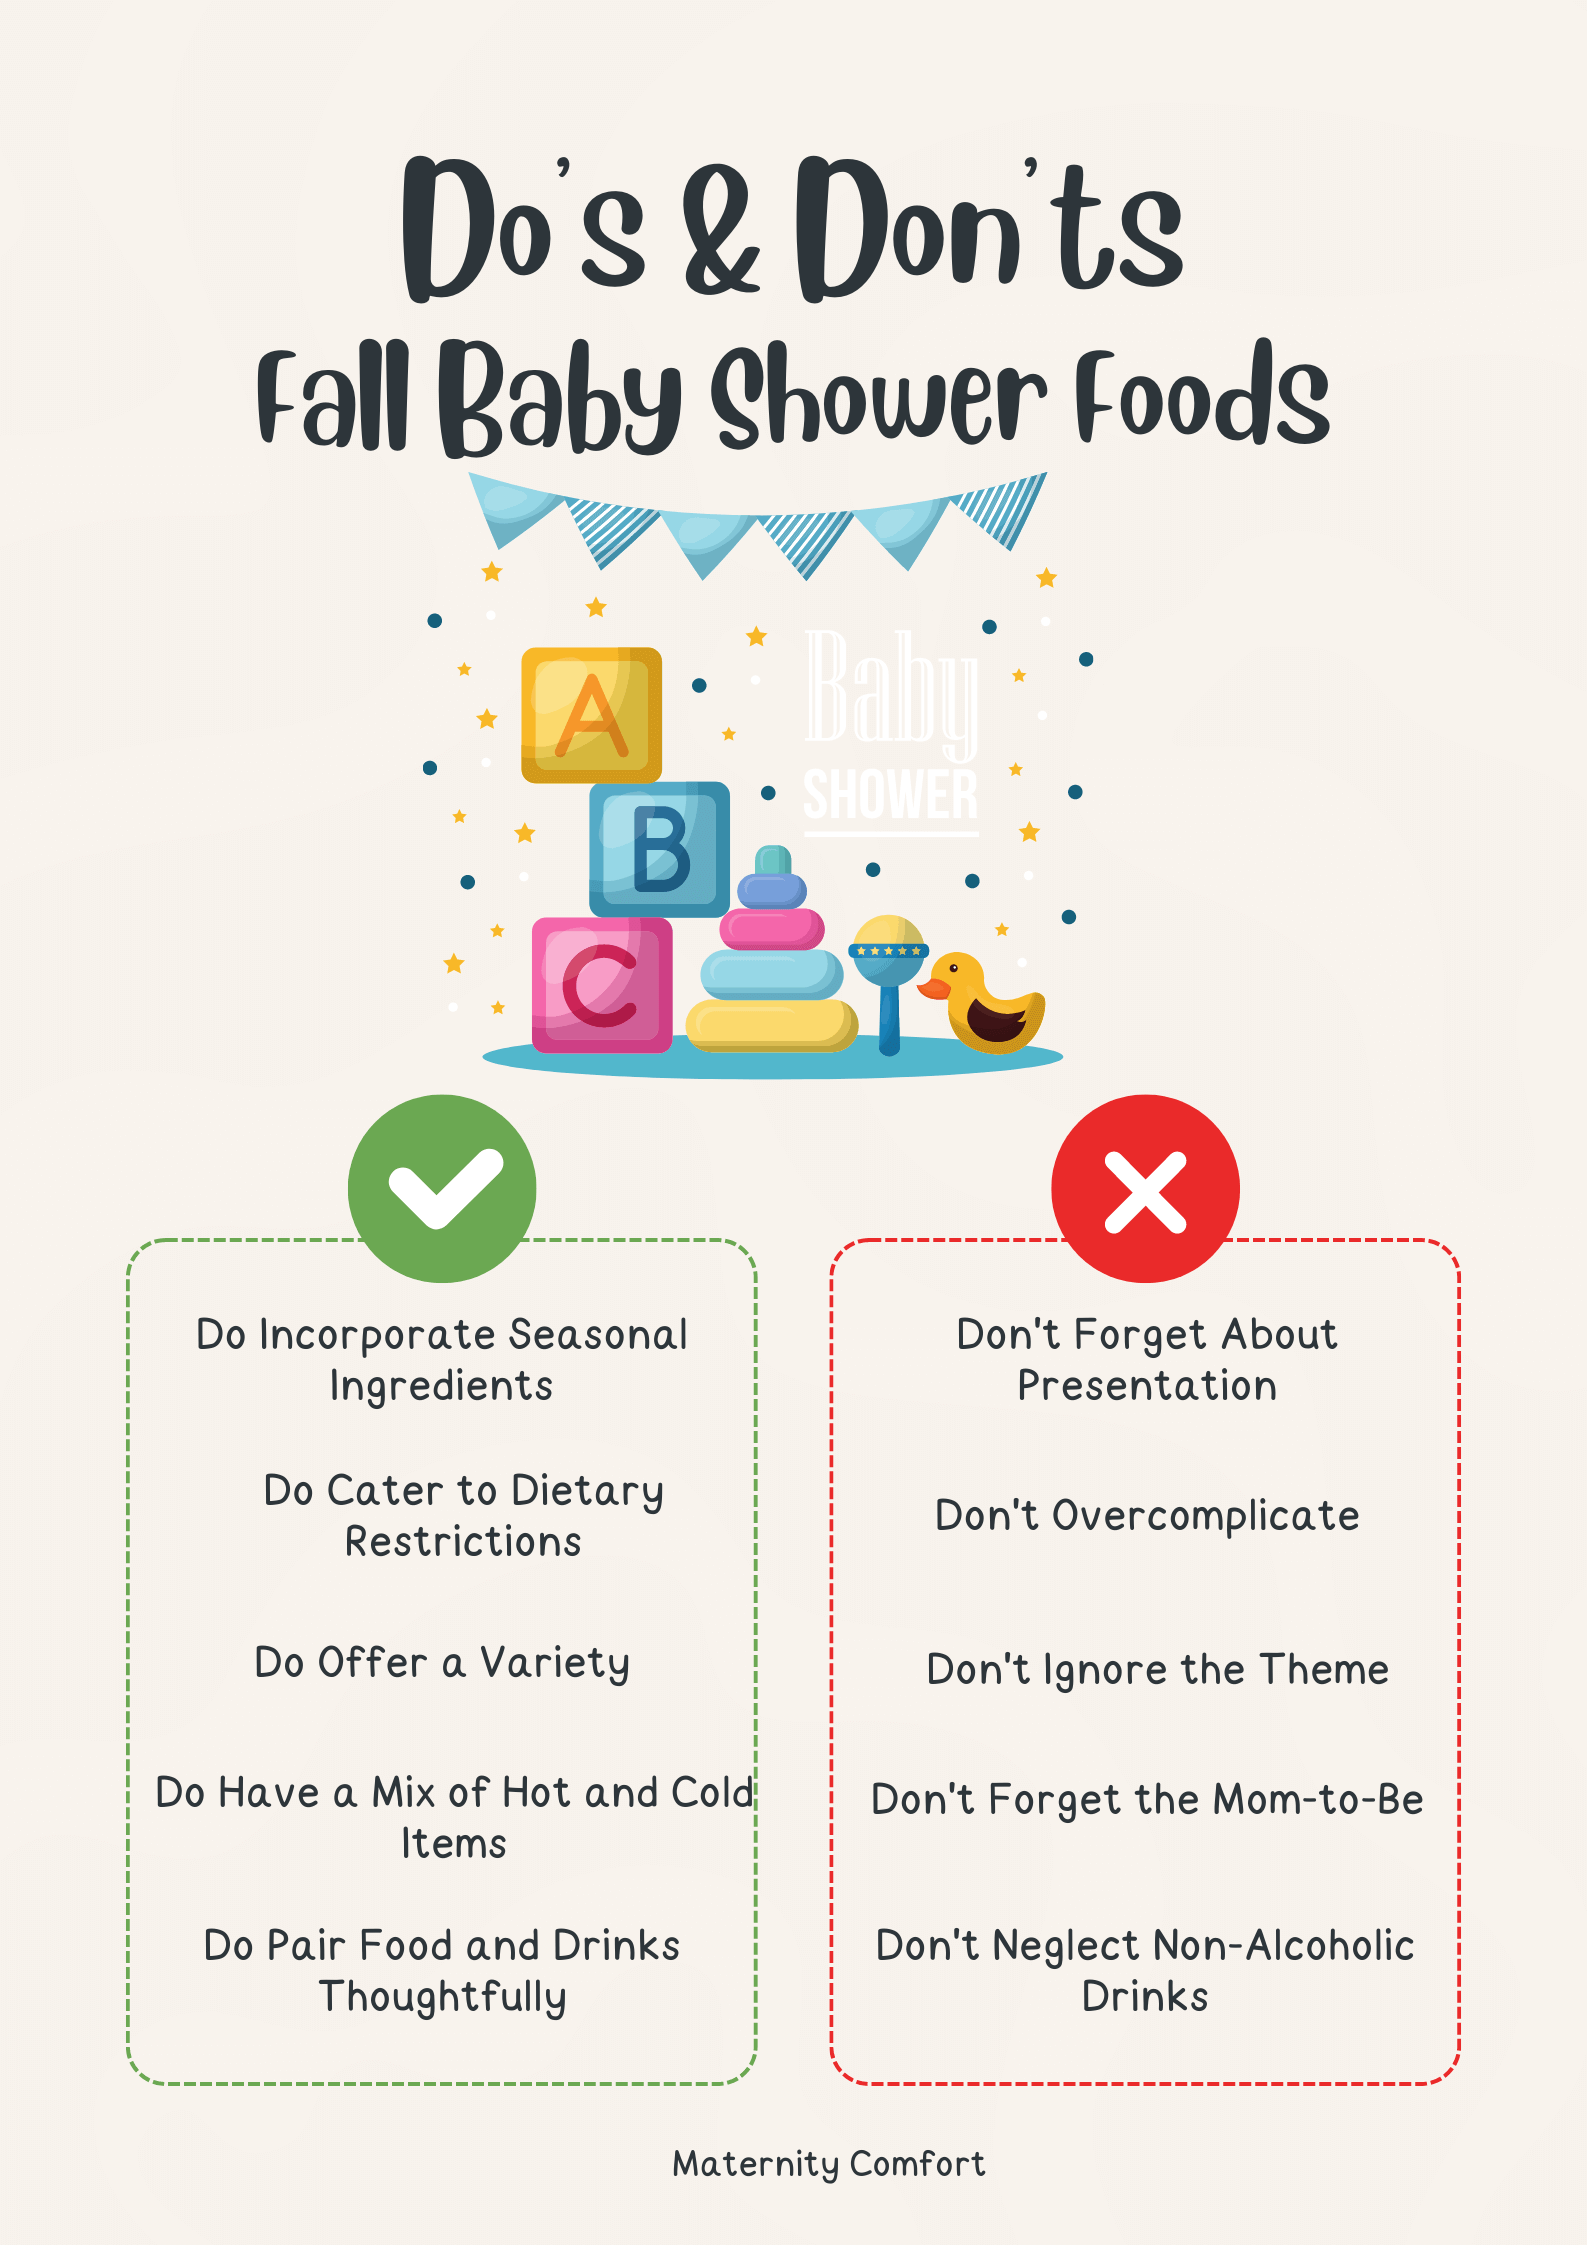 Fall baby shower do's and don'ts